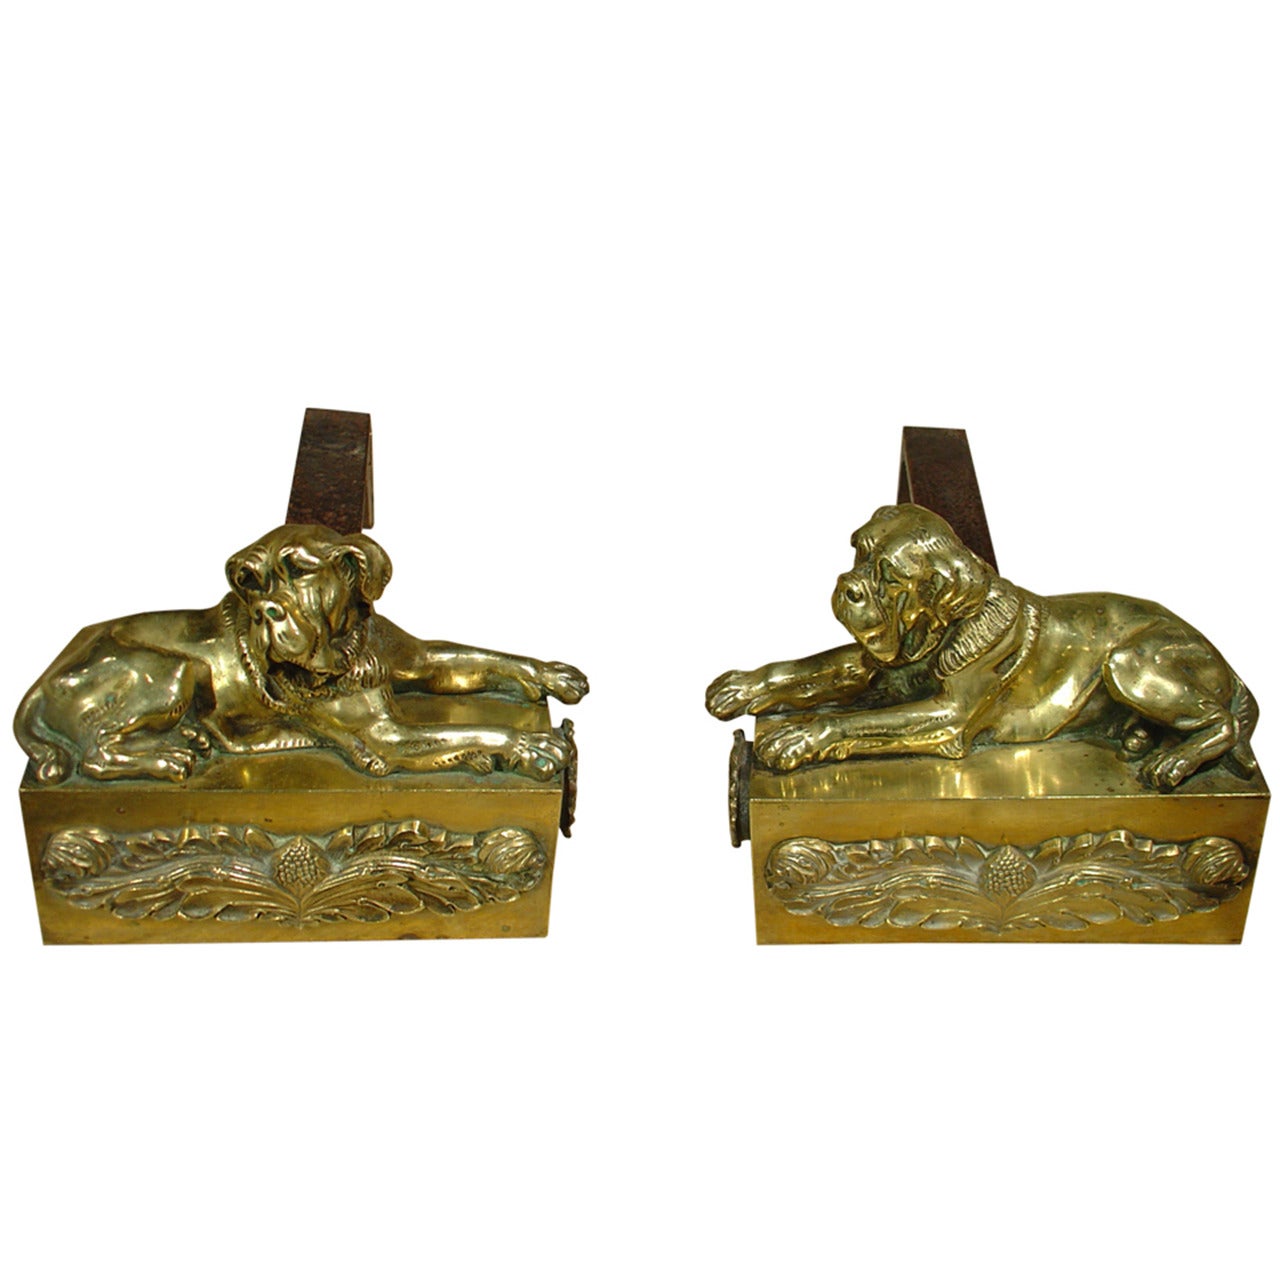 Pair of Antique Mastiff Andirons from France